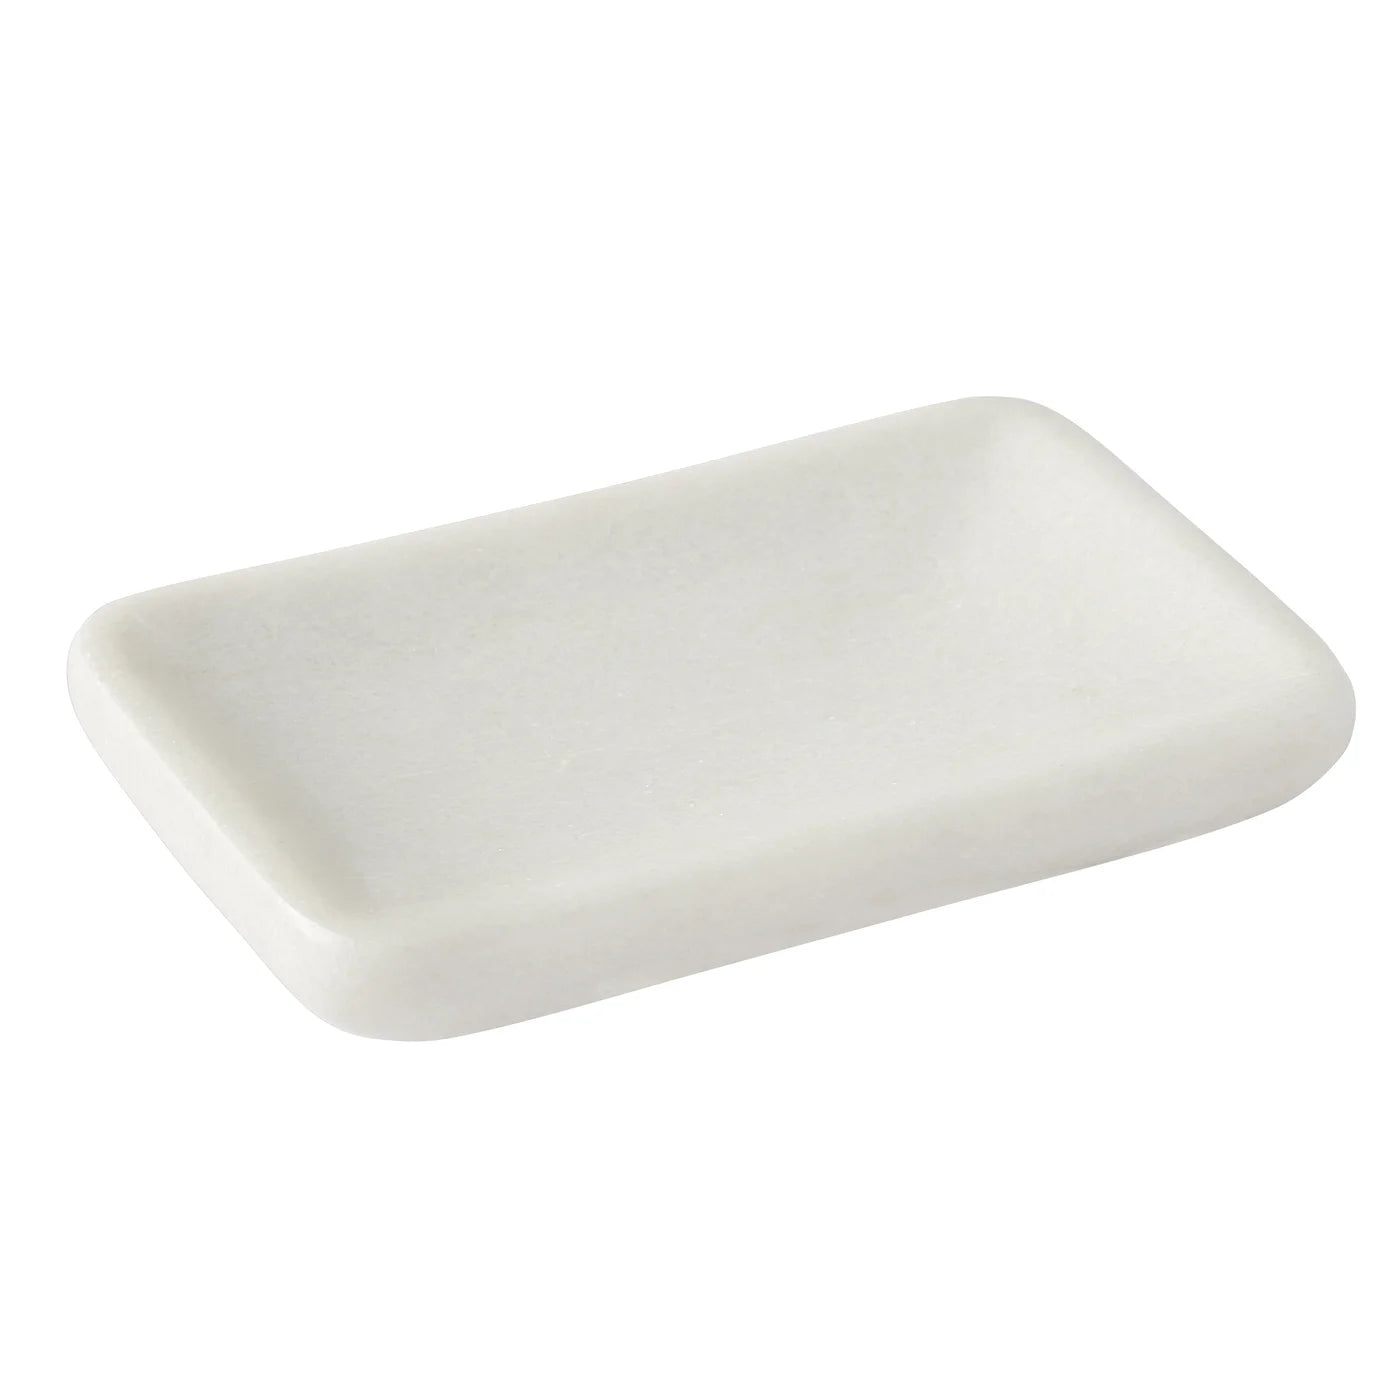 5" Marble Rectangle Dish